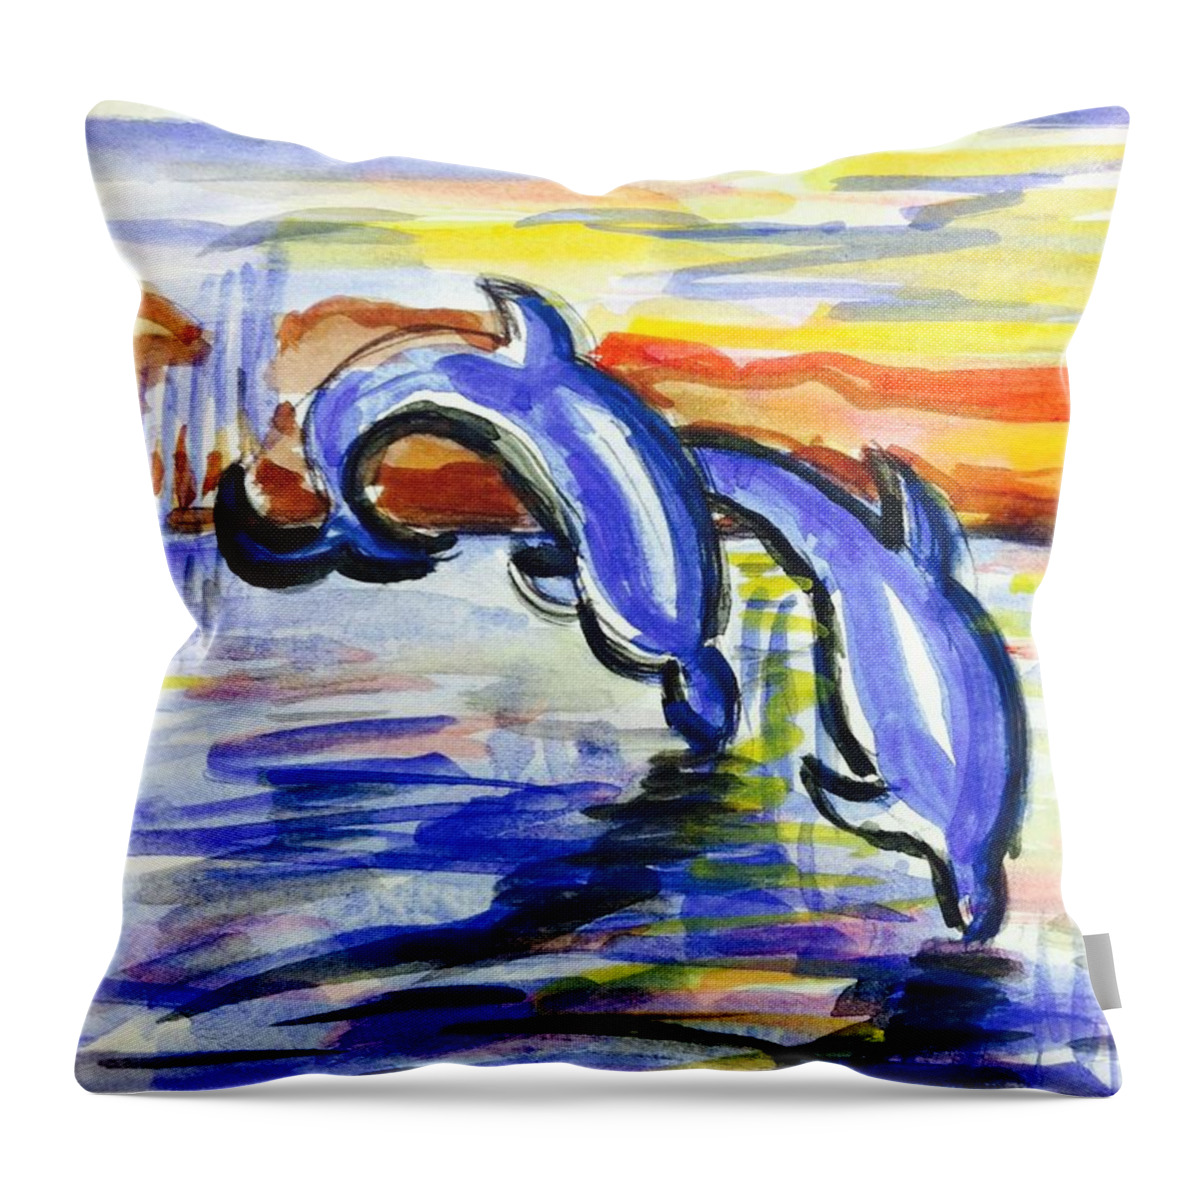  Throw Pillow featuring the painting A day at the beach 4 by Hae Kim